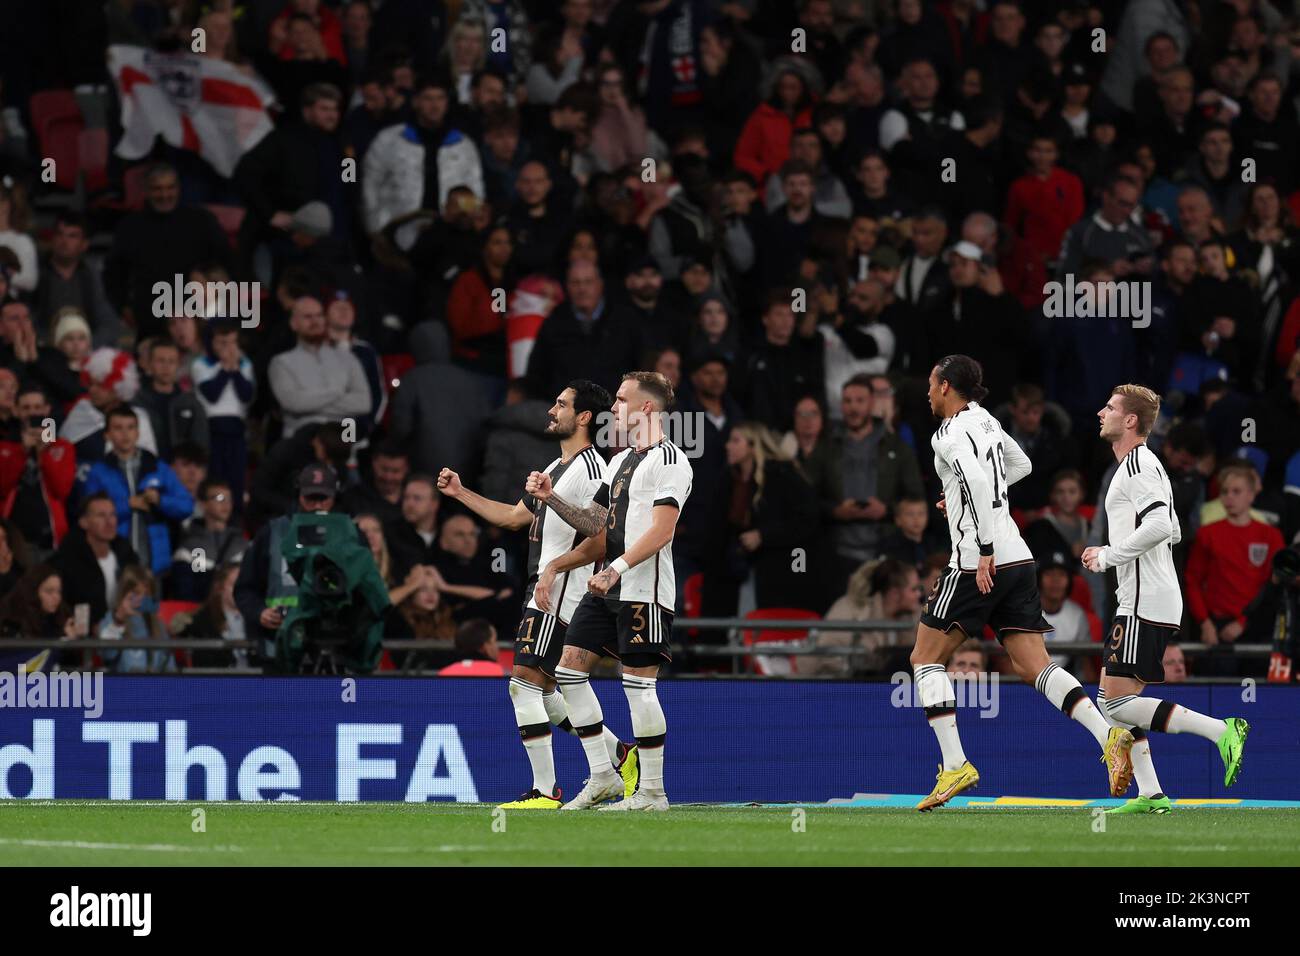 London, UK. 26th Sep, 2022. Ilkay Gundogan of Germany celebrates with his teammates after scoring a goal from penalty spot. England v Germany, UEFA Nations league International group C match at Wembley Stadium in London on Monday 26th September 2022. Editorial use only. pic by Andrew Orchard/Andrew Orchard sports photography/Alamy Live News Credit: Andrew Orchard sports photography/Alamy Live News Stock Photo